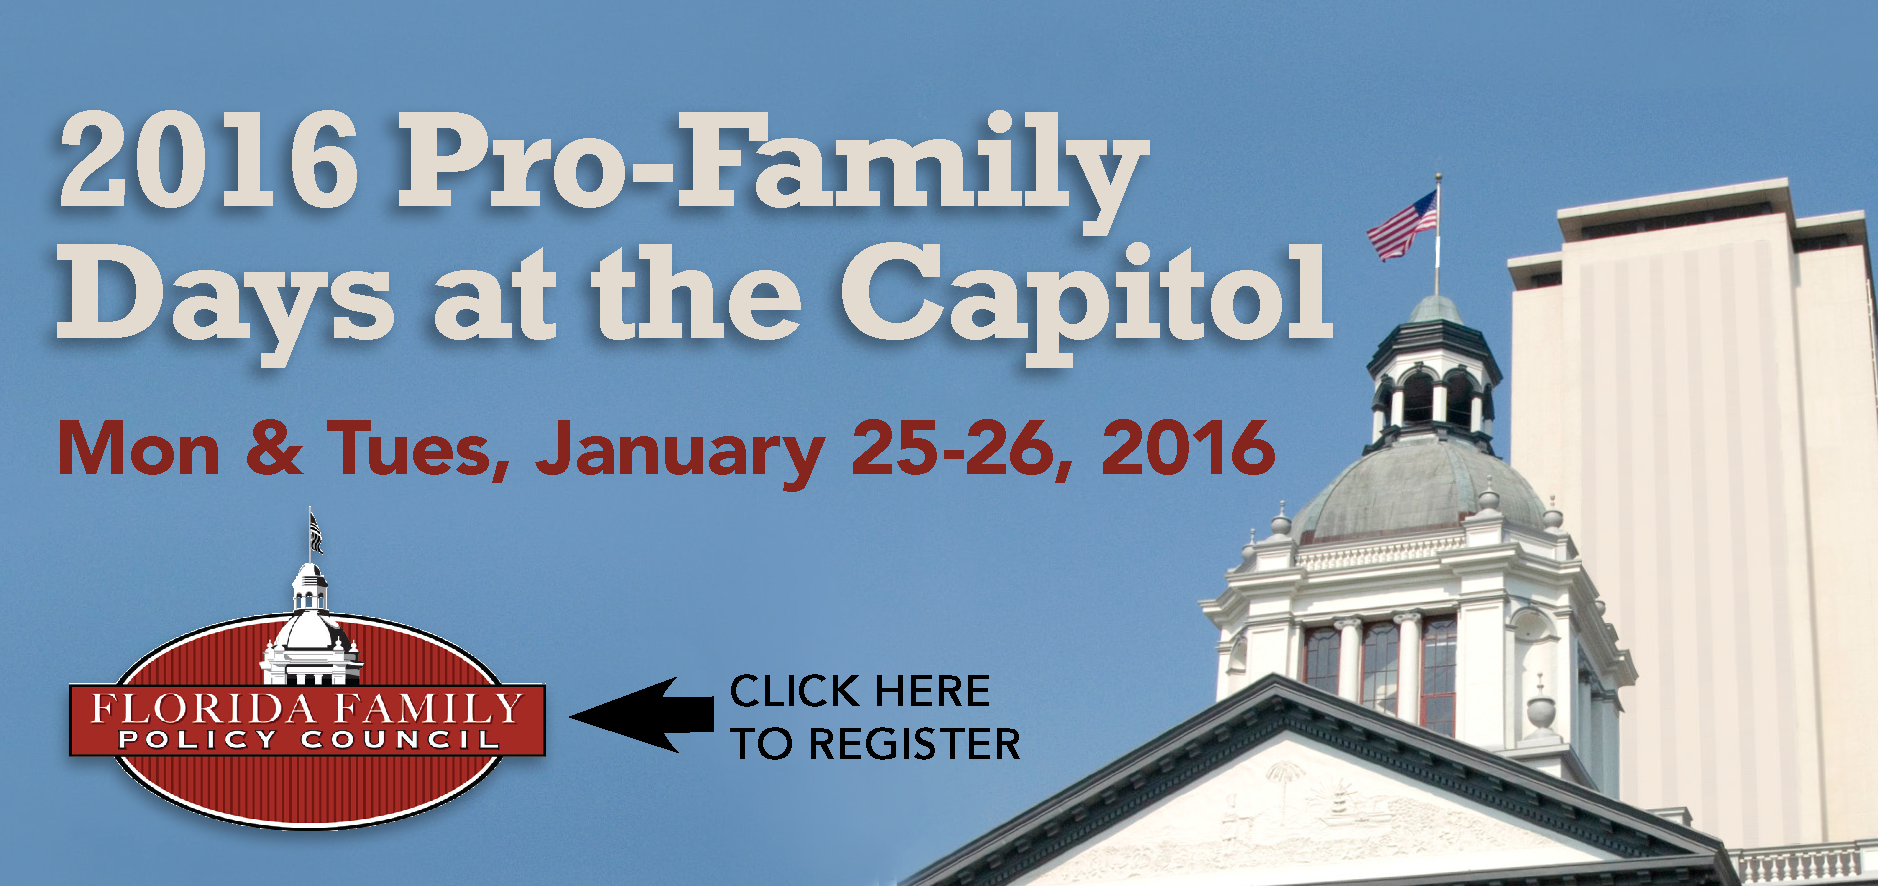 Register Now for Pro-Life, Pro-Family Days at the Capitol | January 25-26